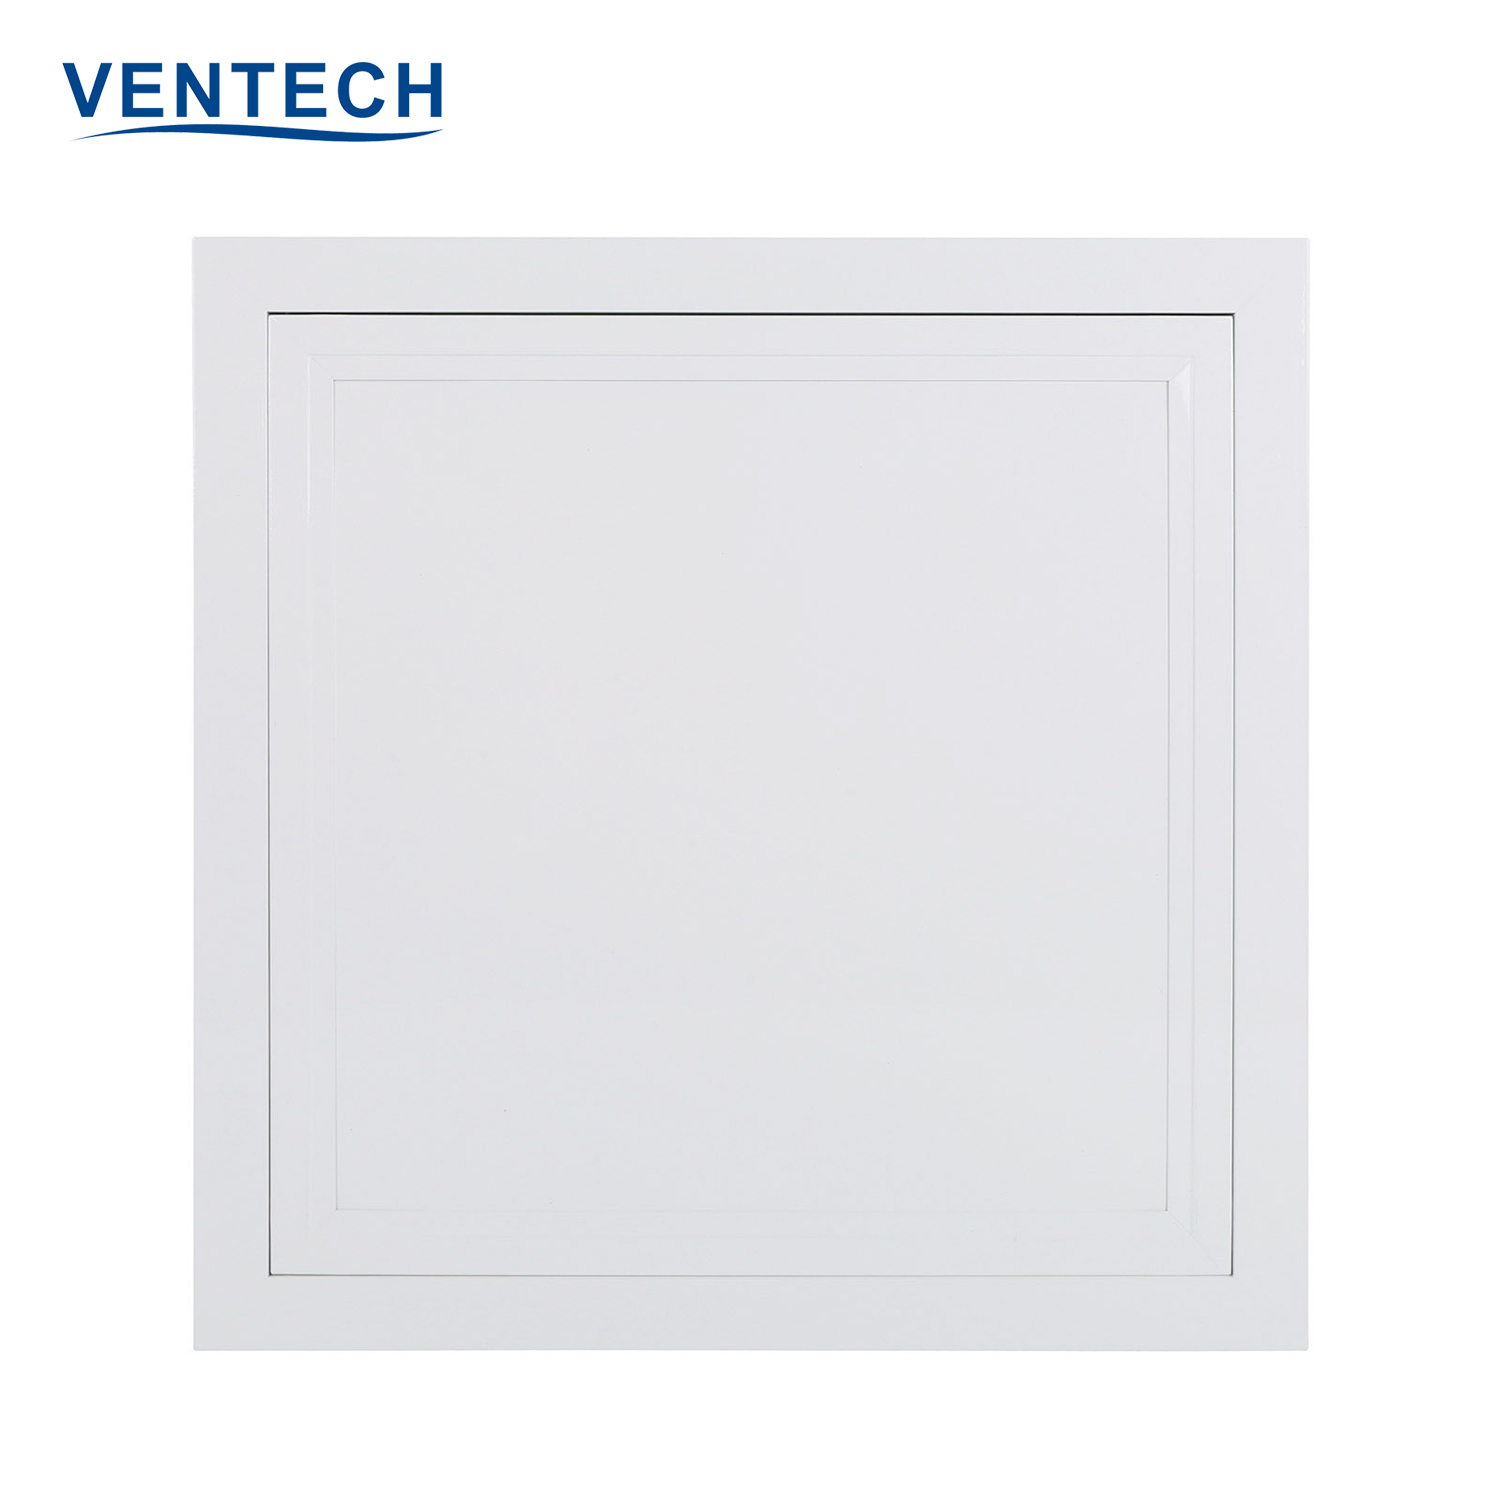 Ventech high-quality ceiling access panel factory direct supply for long corridors-1